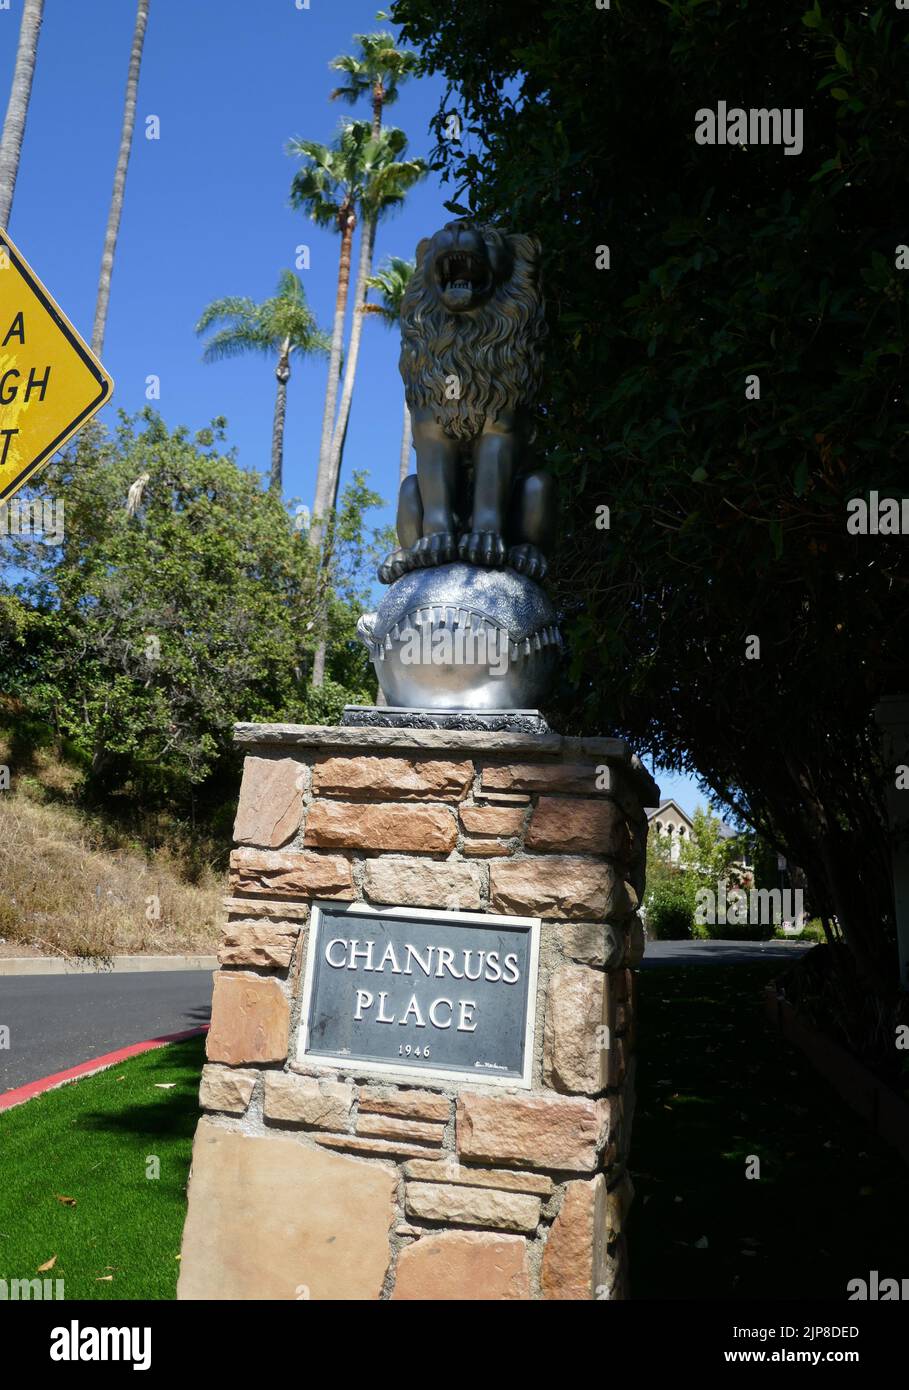 Beverly Hills, California, USA 15th August 2022 Chanruss Place Street Sign on August 15, 2022 in Beverly Hills, California, USA. Photo by Barry King/Alamy Stock Photo Stock Photo